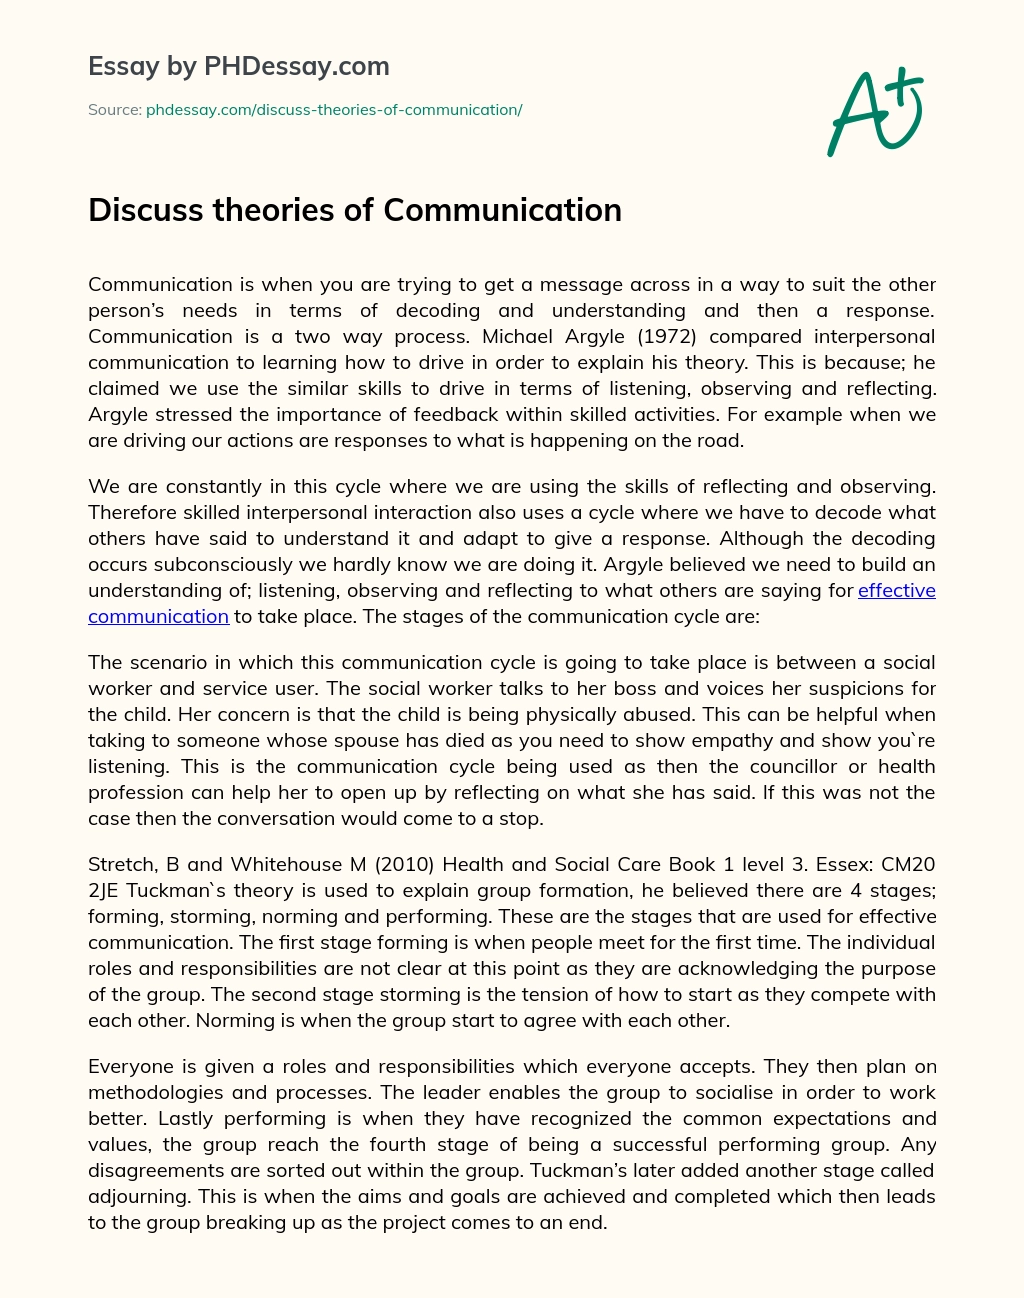 Discuss theories of Communication essay